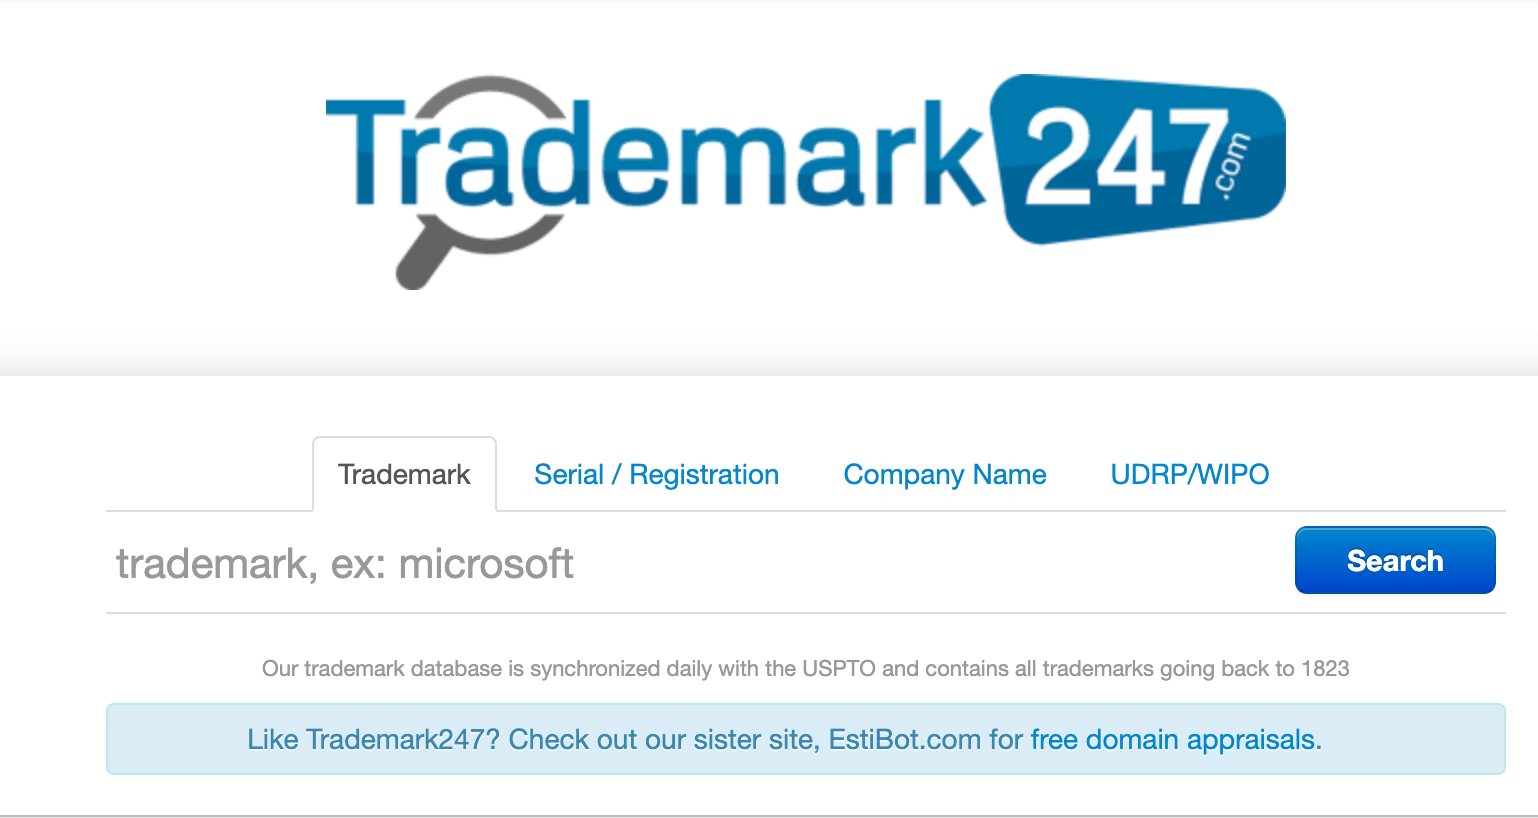 Trademark 247's home page